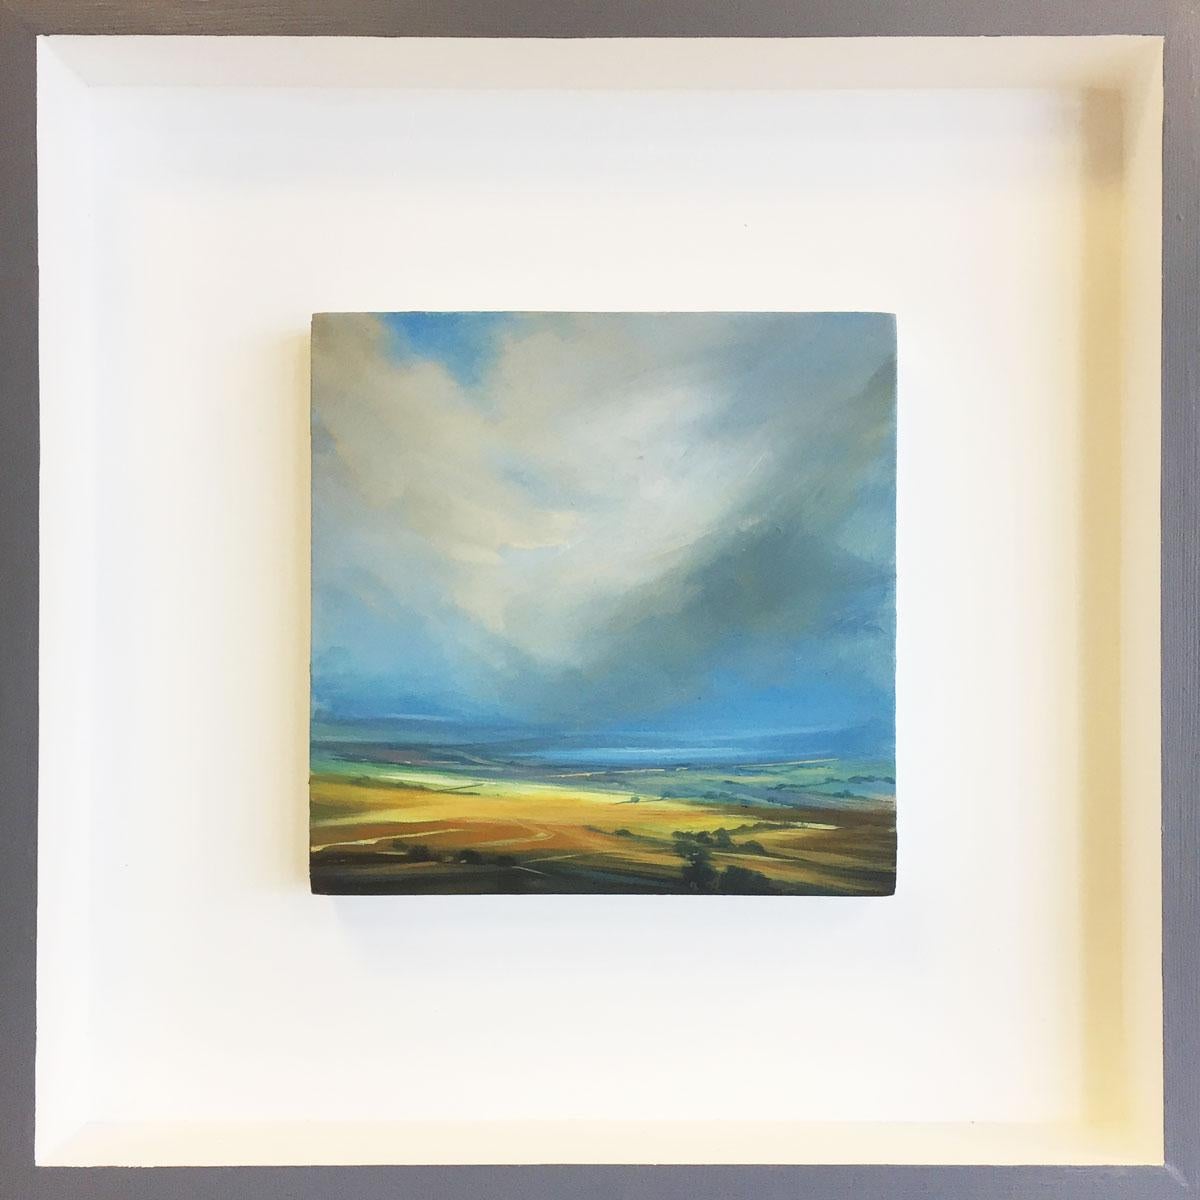 Distant Treeline is an original abstract landscape painting by Dairo Vargas,  framed and ready to be hanged.  This 21st Century artwork is signed on back and includes a Certificate of Authenticity.

Colombian by birth, Dairo Vargas is a contemporary